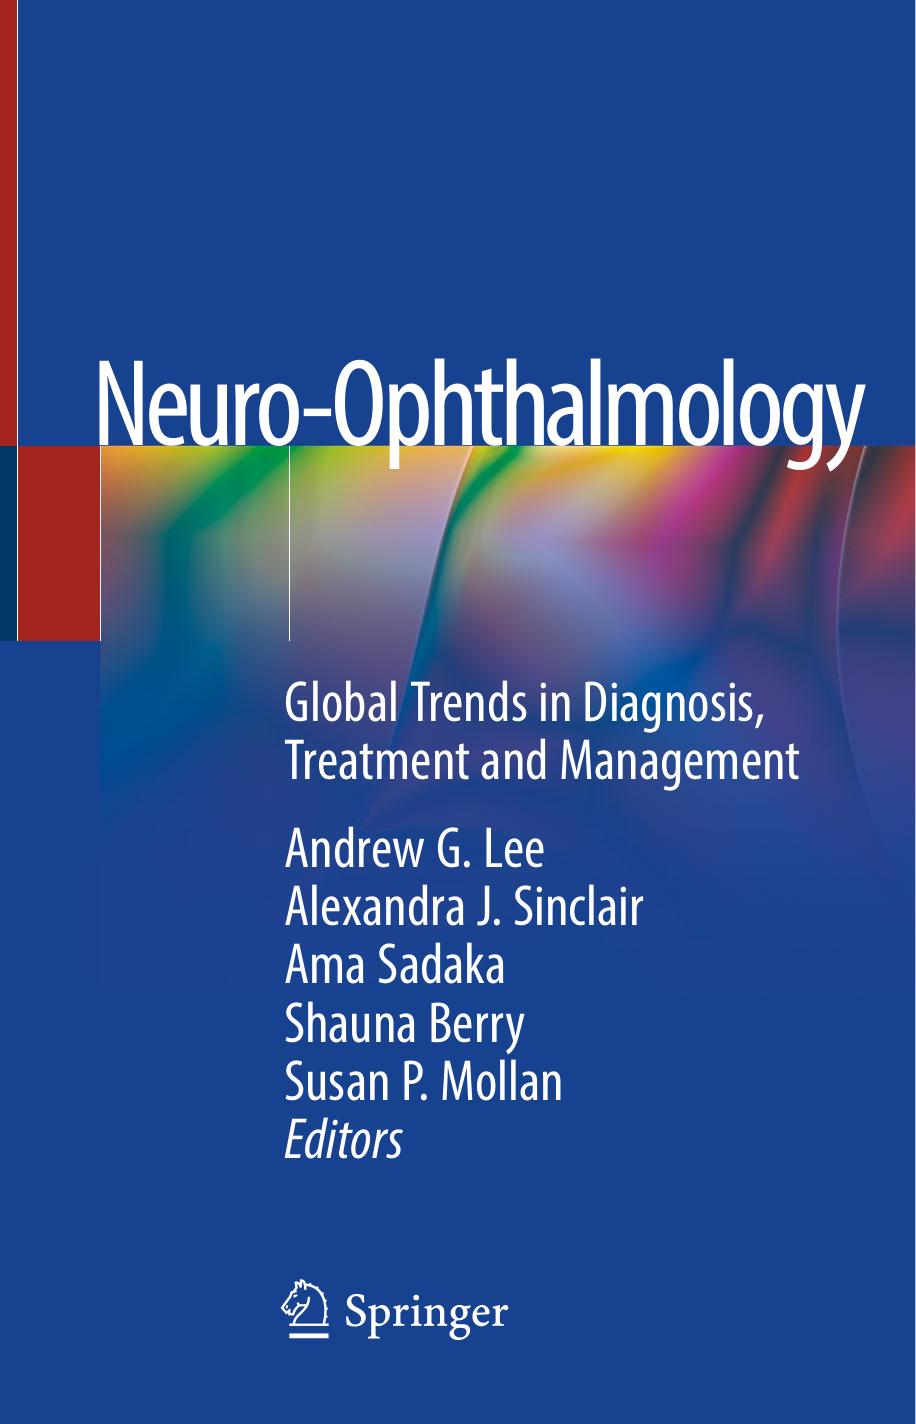 Neuro-Ophthalmology  Global Trends in Diagnosis, Treatment and Management 2019